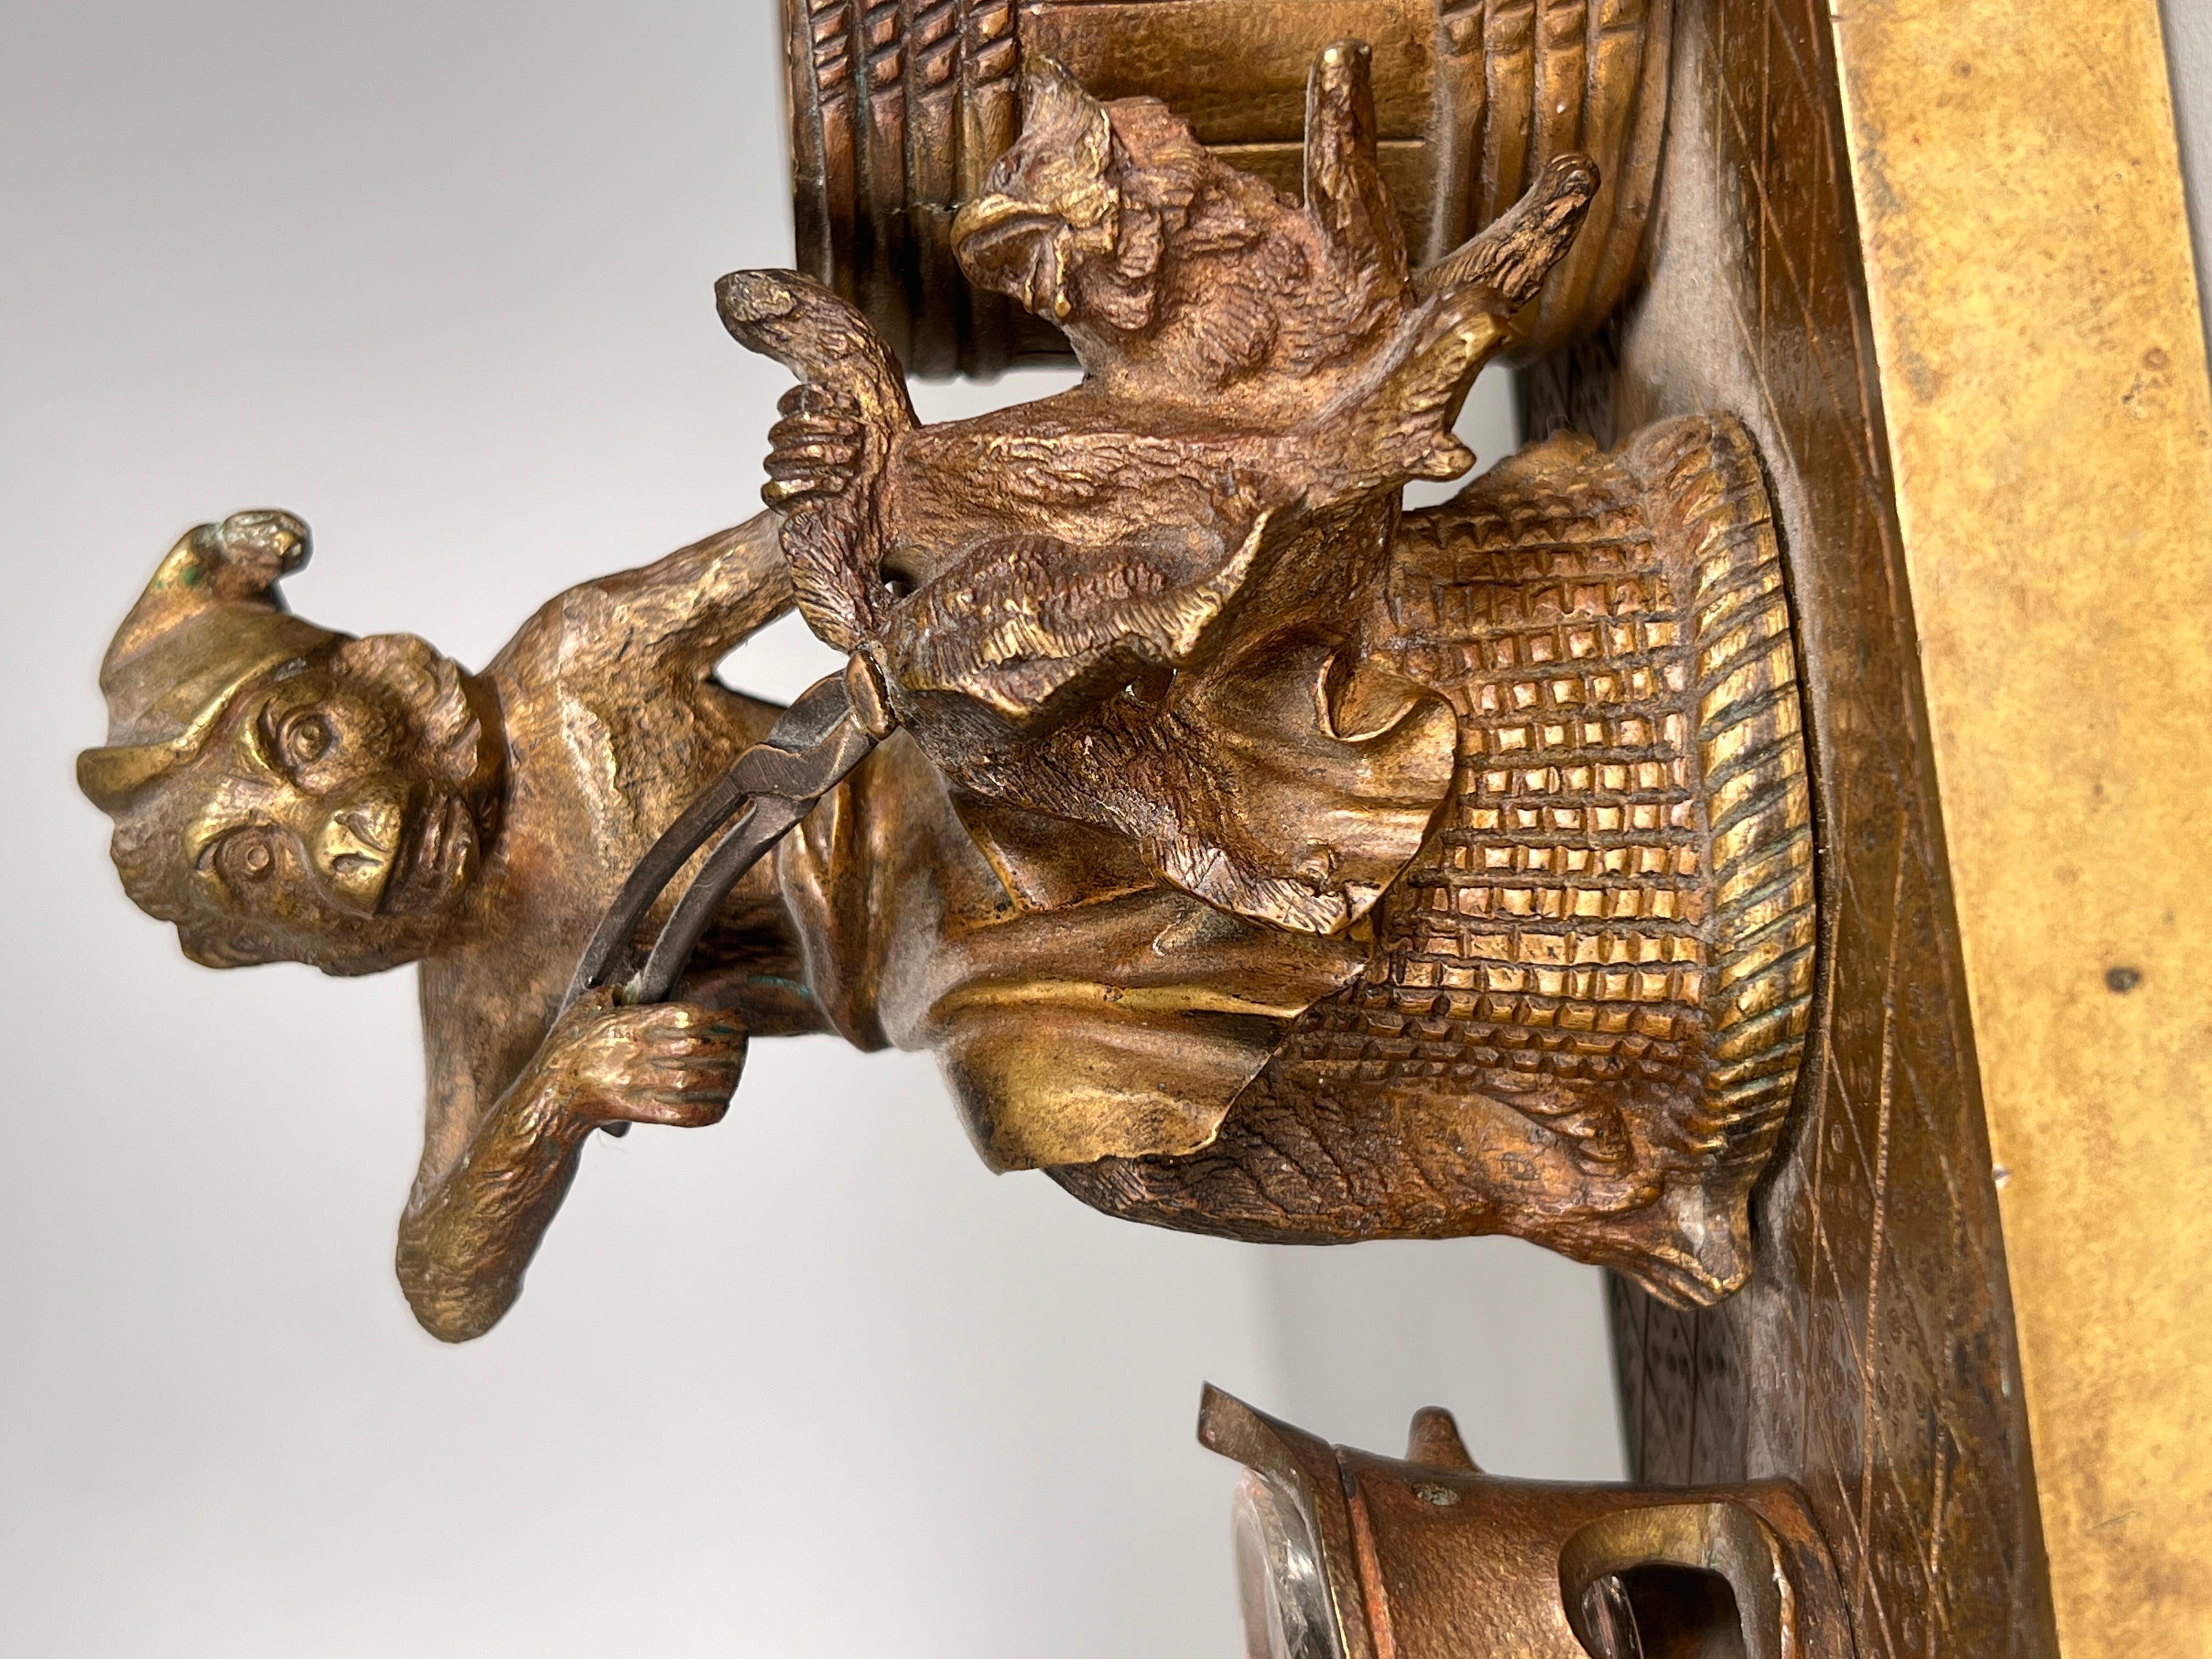 Well what can I say about this incredible Inkwell, I have seen many examples from this period that depict monkeys tormenting cats but I have never seen one that is quite this extreme! Its definitely a love it or hate it item.... probably not one for